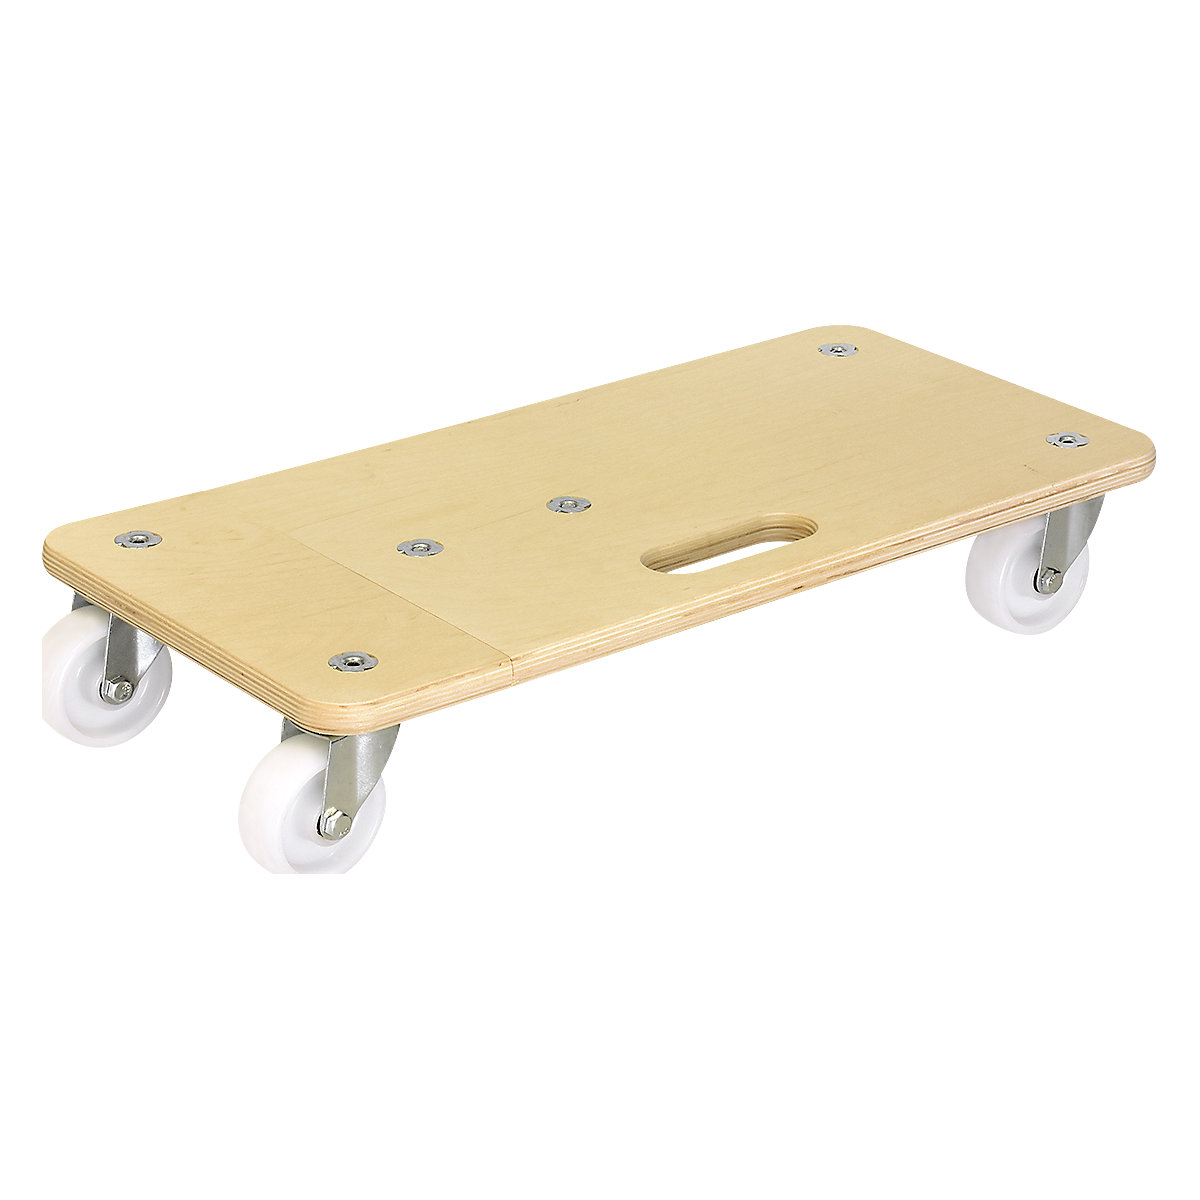 Wagner – MM 1331 extendable transport dolly, LxW 587 – 857 x 290 mm, max. load 200 kg, 5+ items